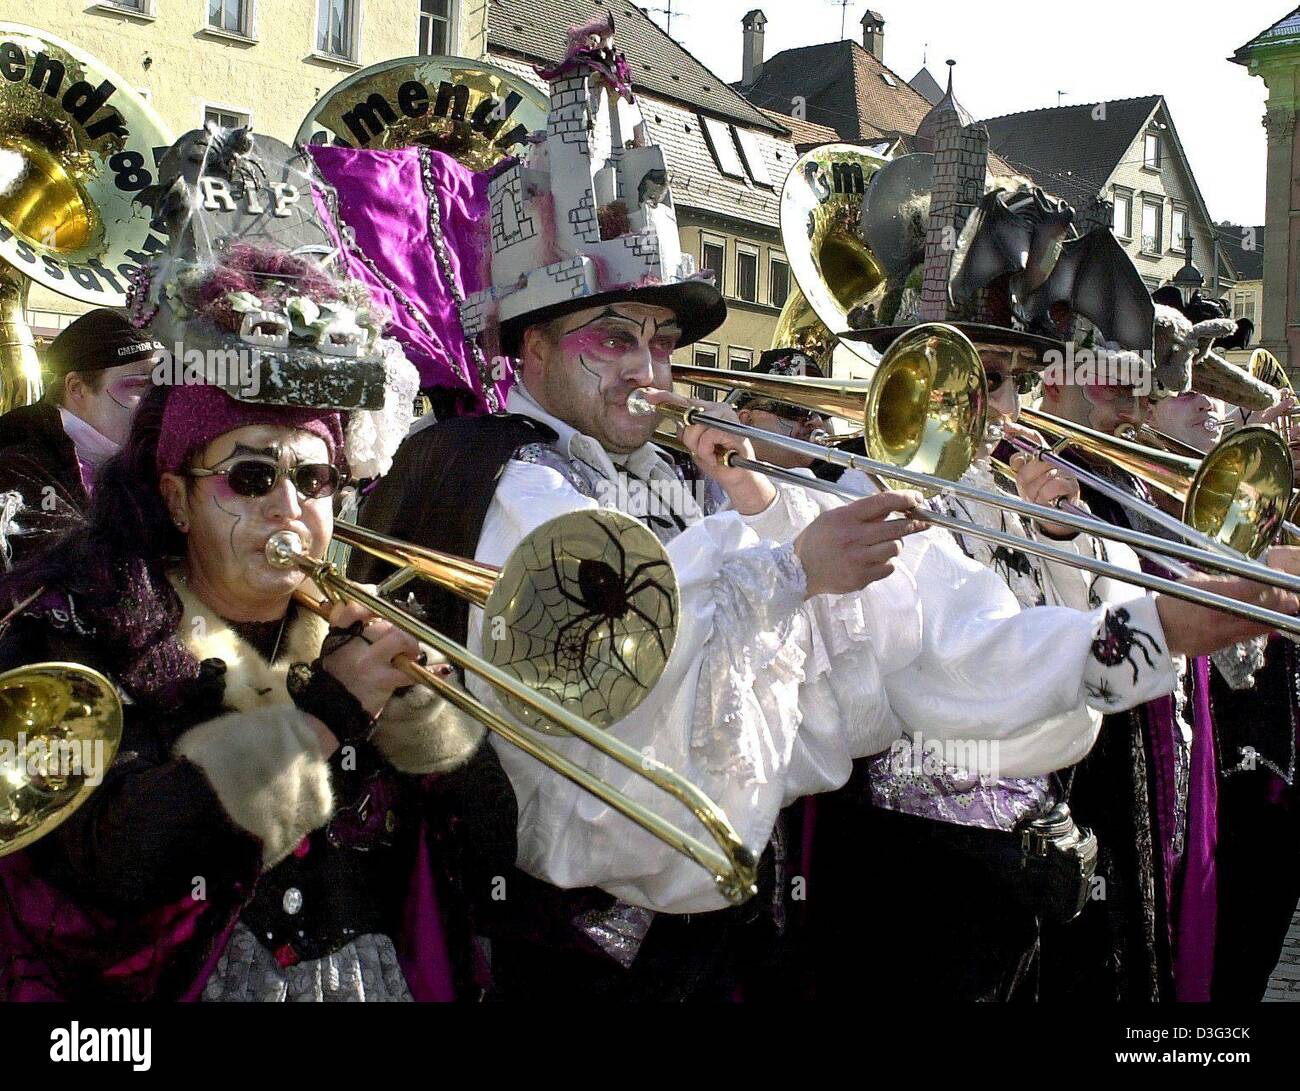 (dpa) - Carnival enthusiasts dressed up in vampire costumes play Guggen music as they march through the streets of Schwaebisch Gmuend, southern Germany, 22 February 2003. 'Gugaaggeri Musig' is originally a characteristic feature of the Swiss carnival which is cultivated by several groups and has become well known far beyond the country. It consists of different instruments, includi Stock Photo